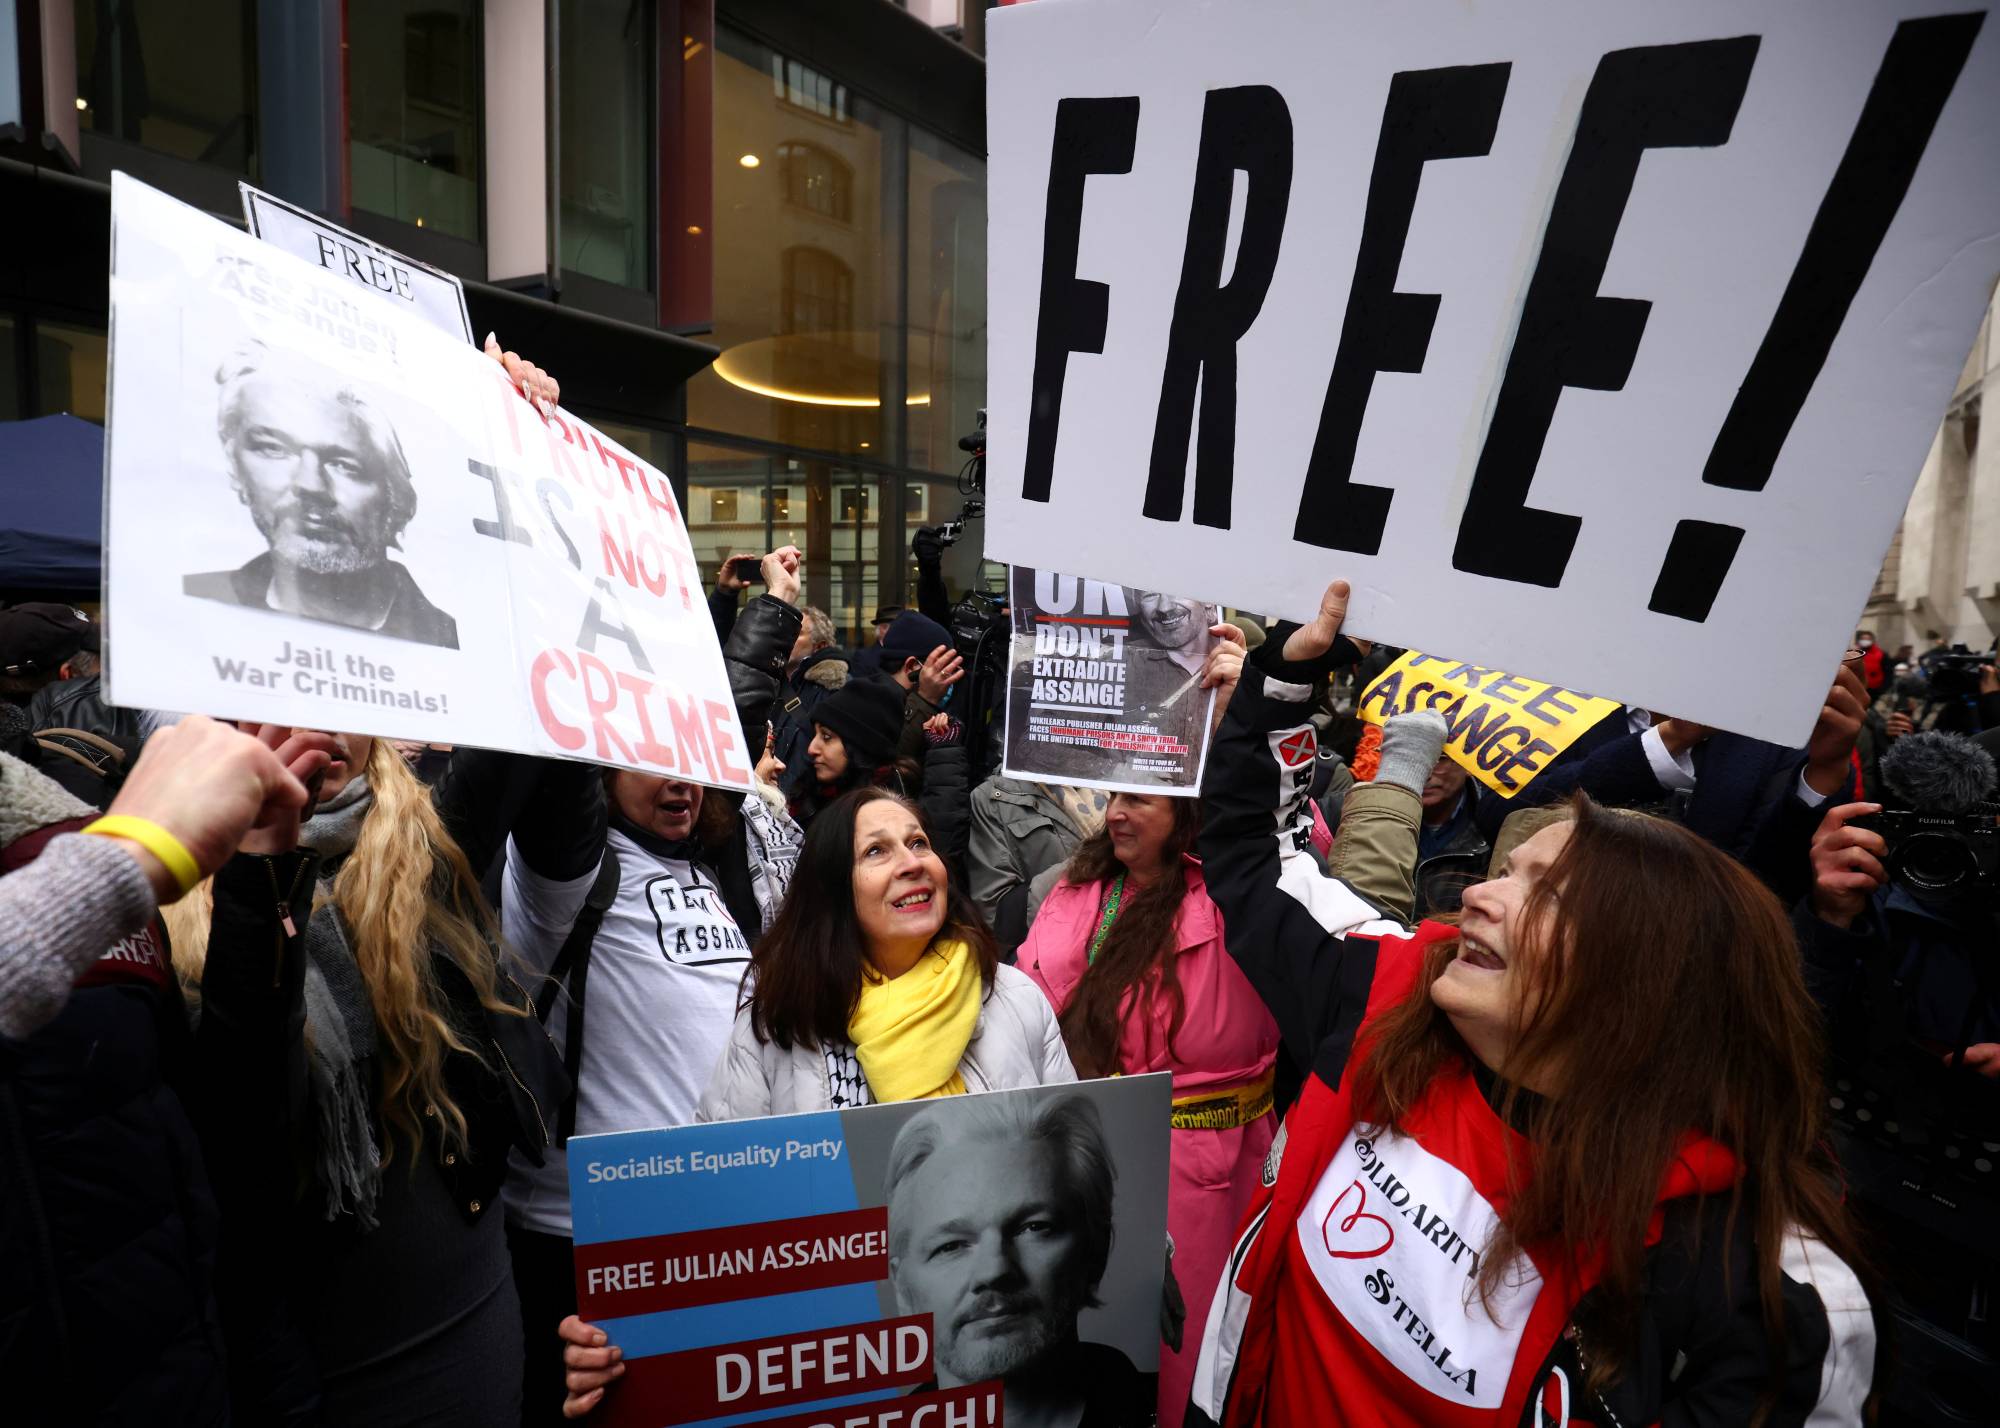 People celebrate outside the Old Bailey in London after a judge ruled Monday that WikiLeaks founder Julian Assange should not be extradited to the U.S. |  REUTERS